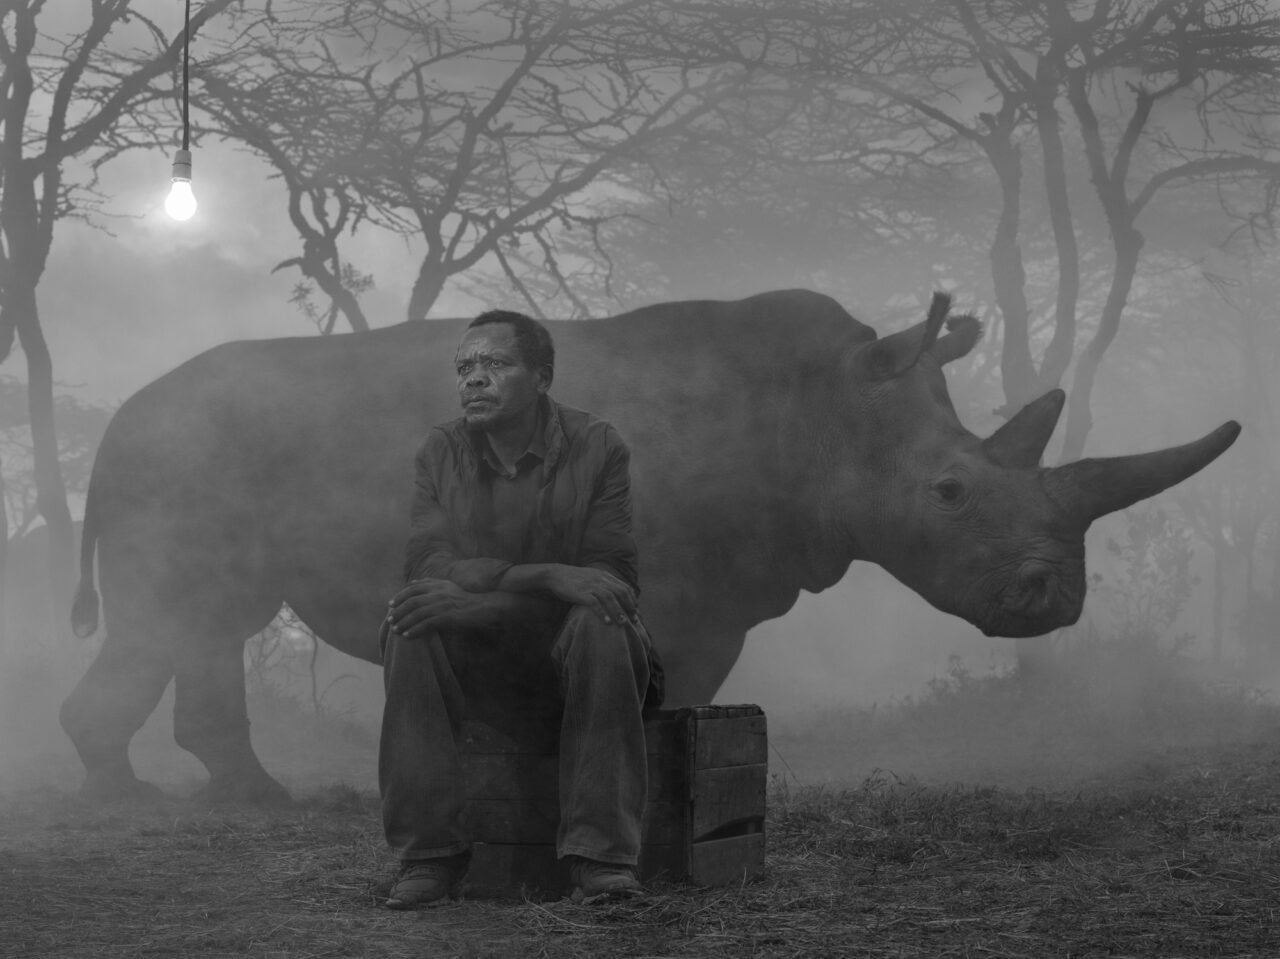 Nick Brandt and Jo-Anne McArthur On Photography and Creating Change for Animals